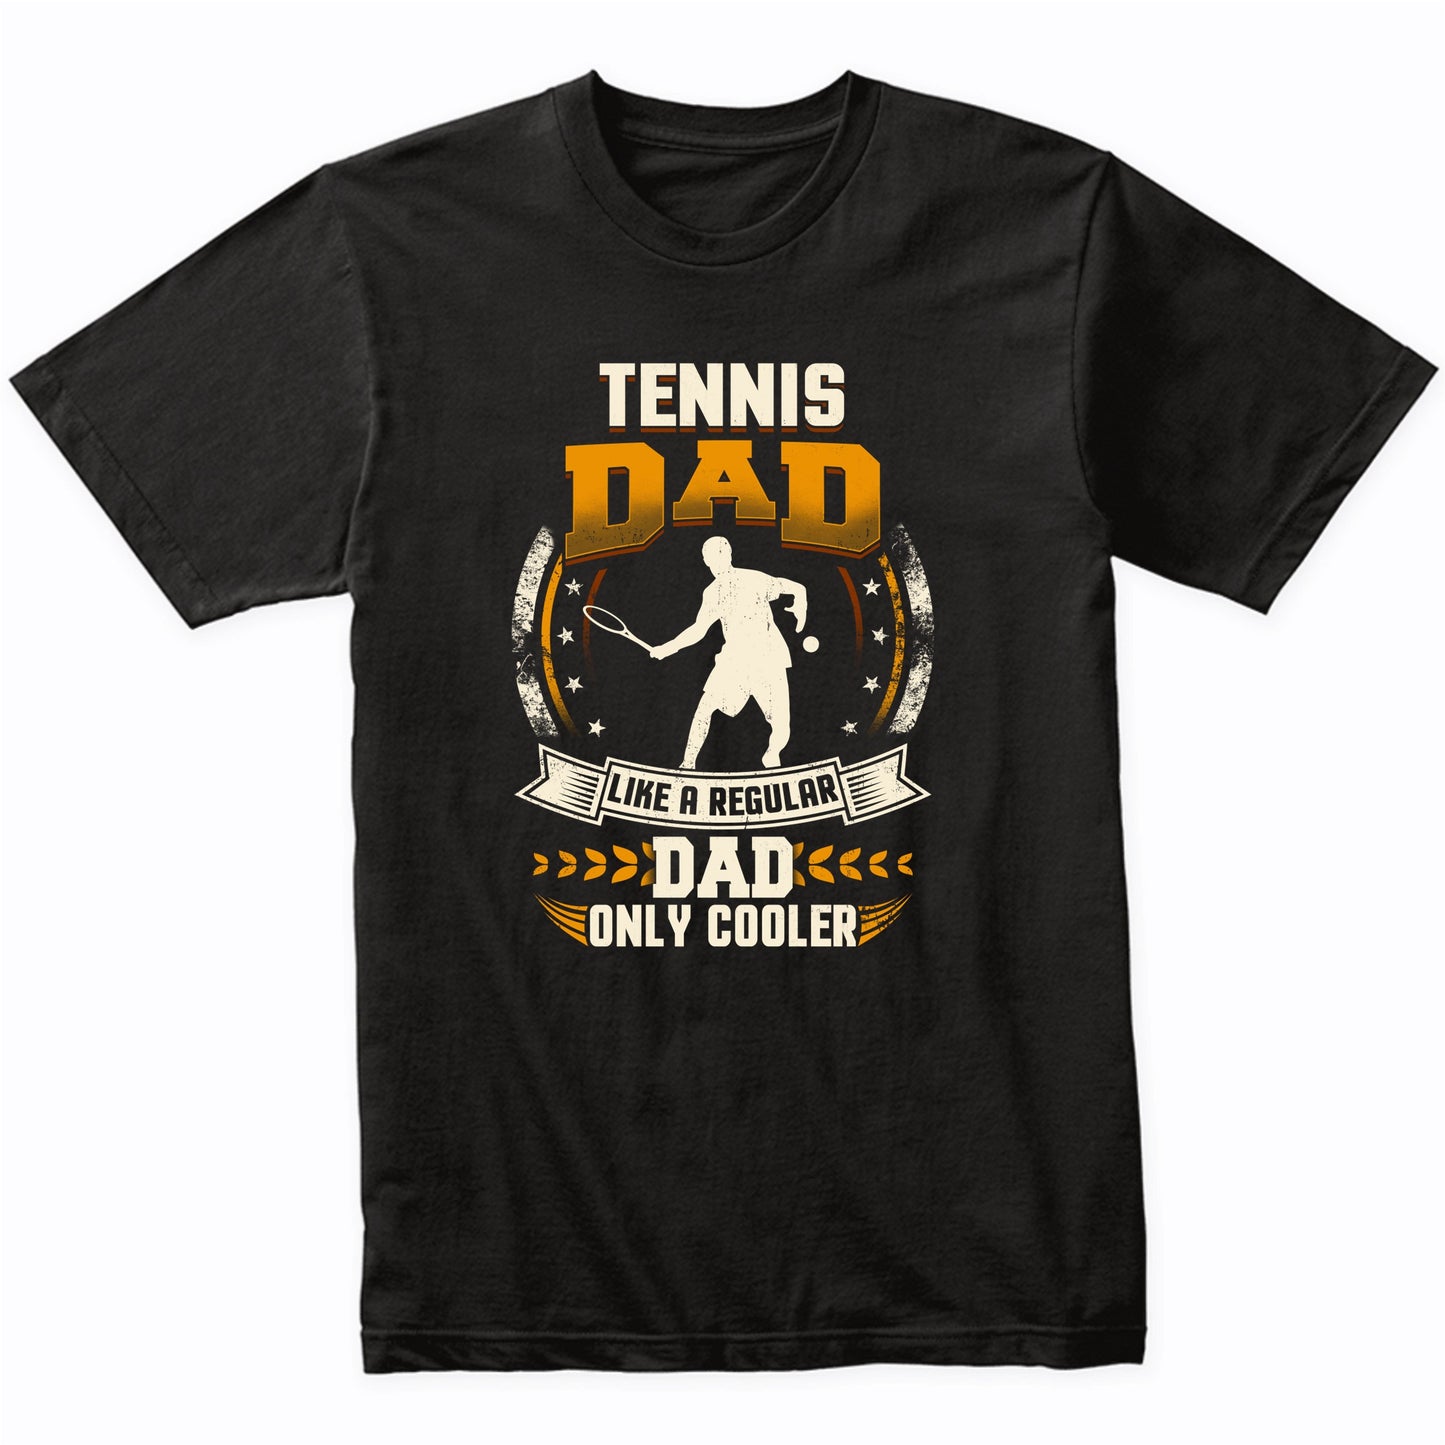 Tennis Dad Like A Regular Dad Only Cooler Funny T-Shirt